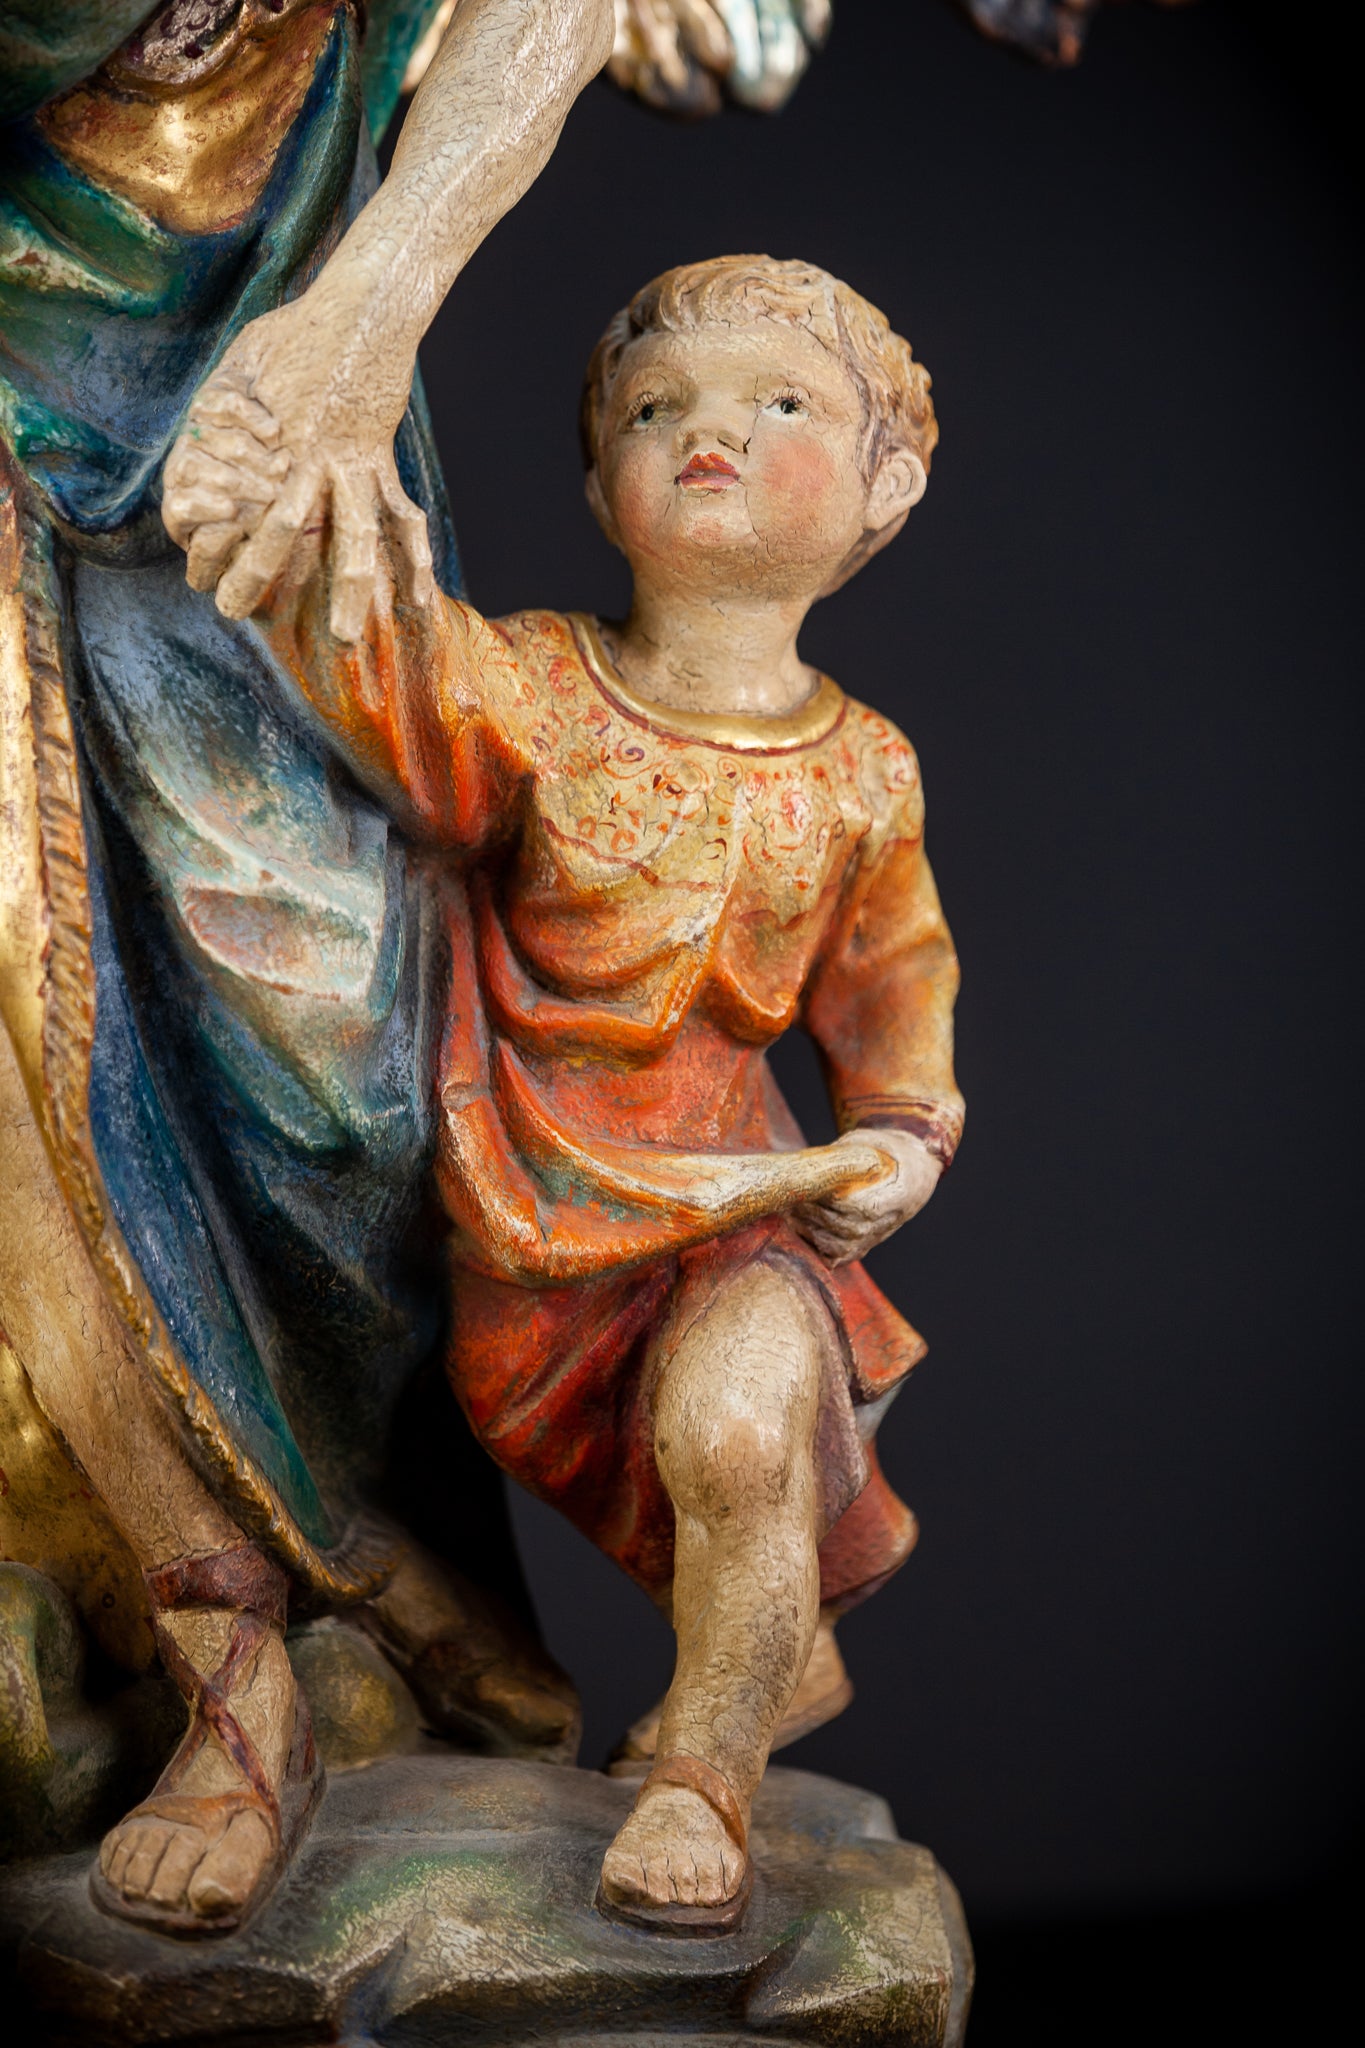 St Raphael The Archangel with Tobias Wood Carving | Antique early 1900s | 23.6” / 60 cm